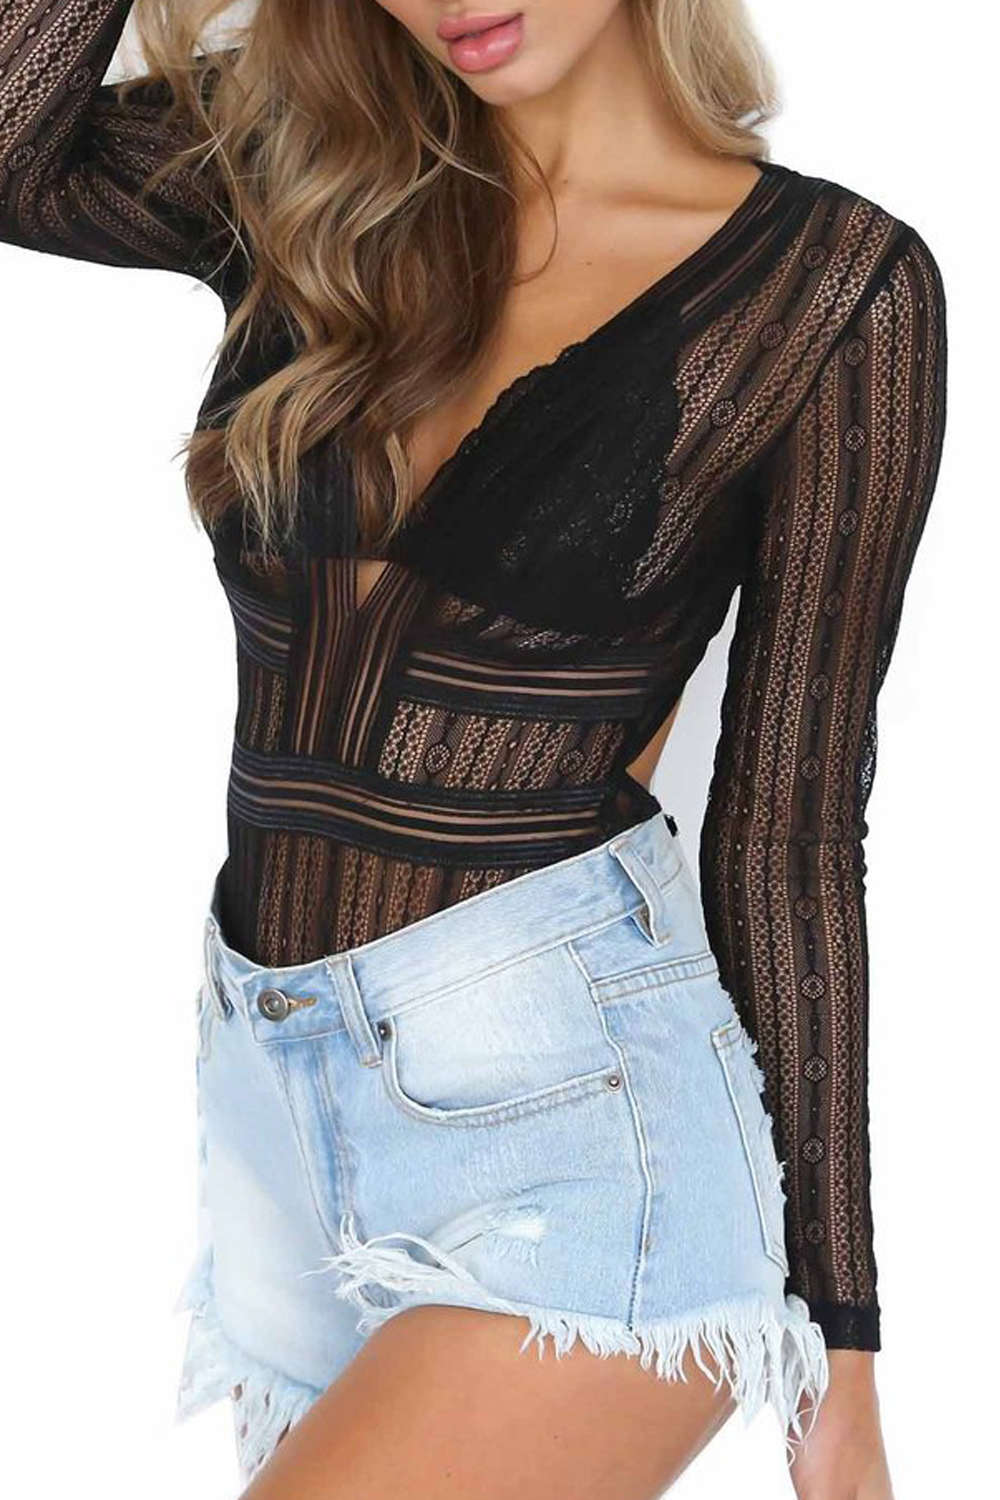 Iyasson Allover Sheer Lace Bodysuit